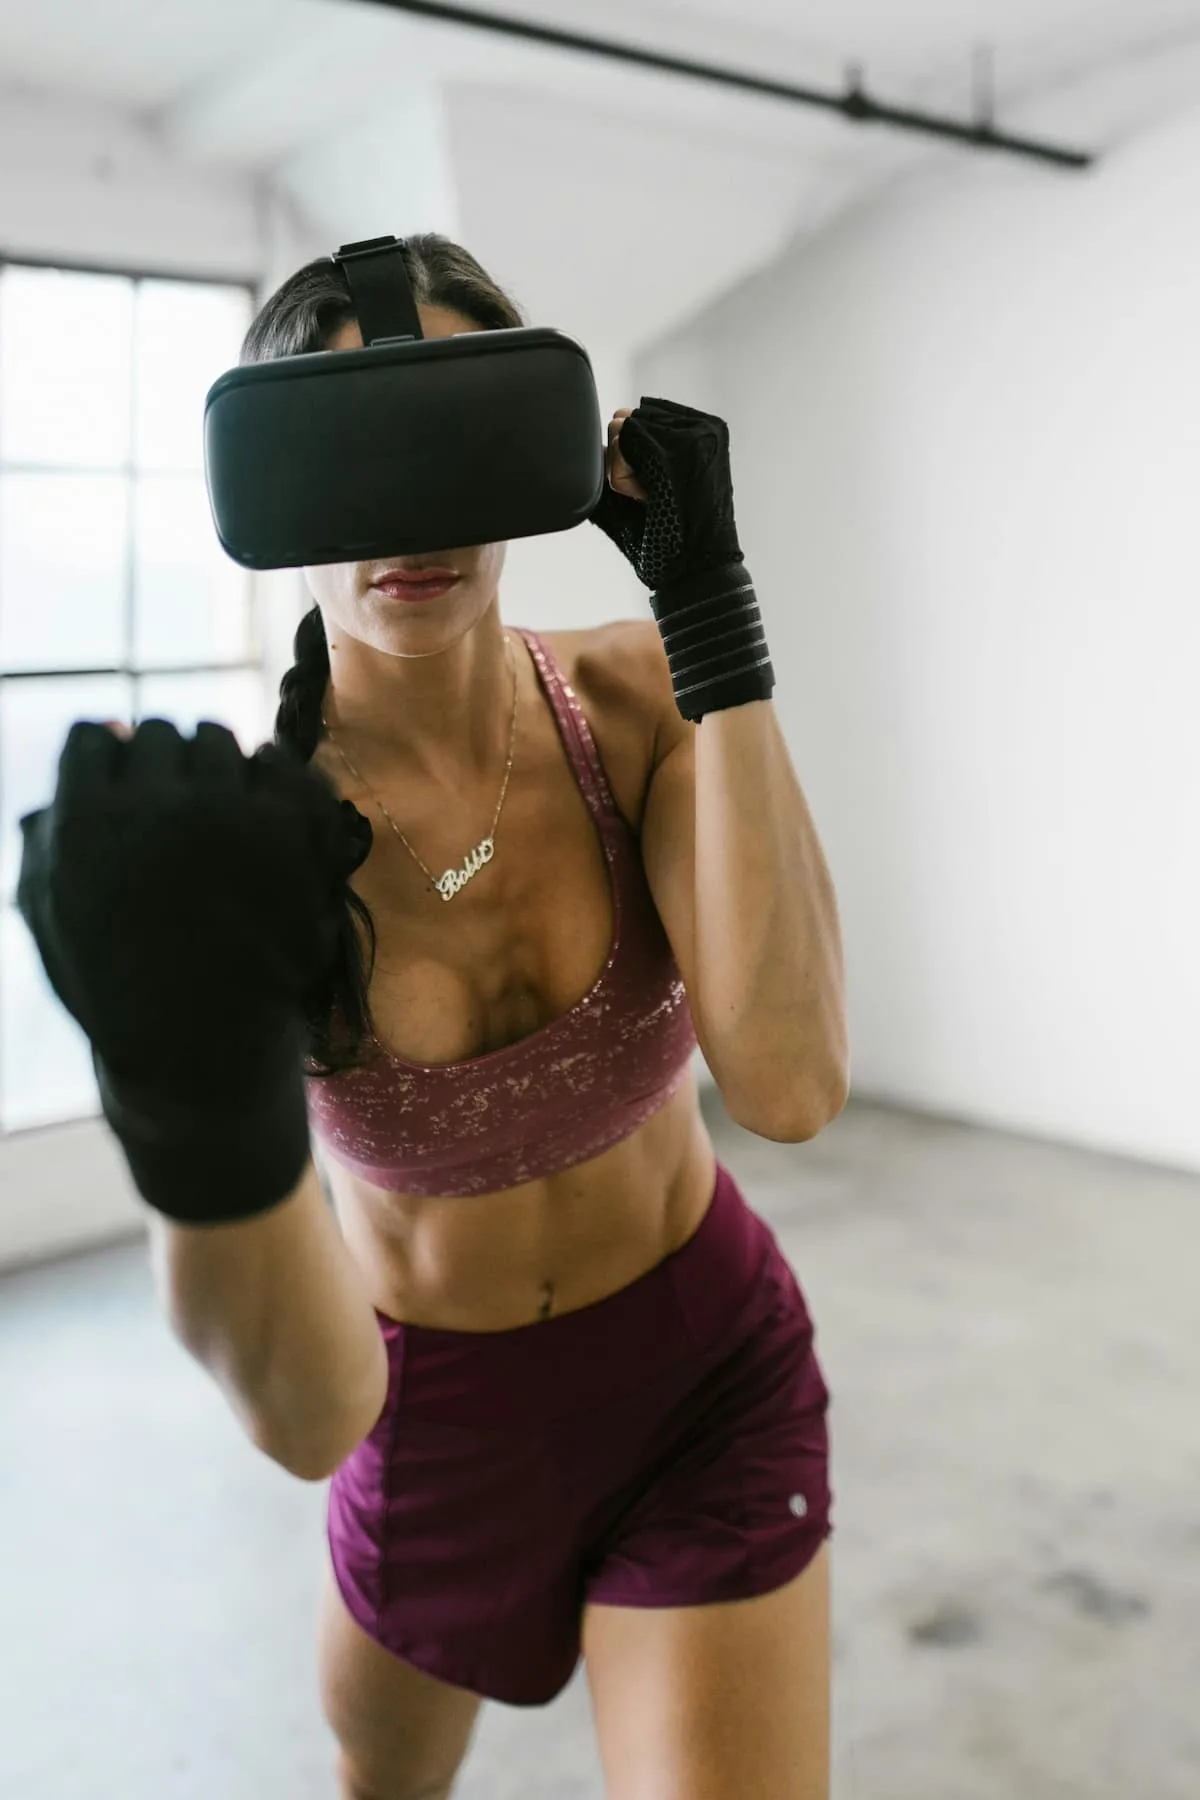 Woman with VR headset in shimmering pink sports bra and boxing pants in posture